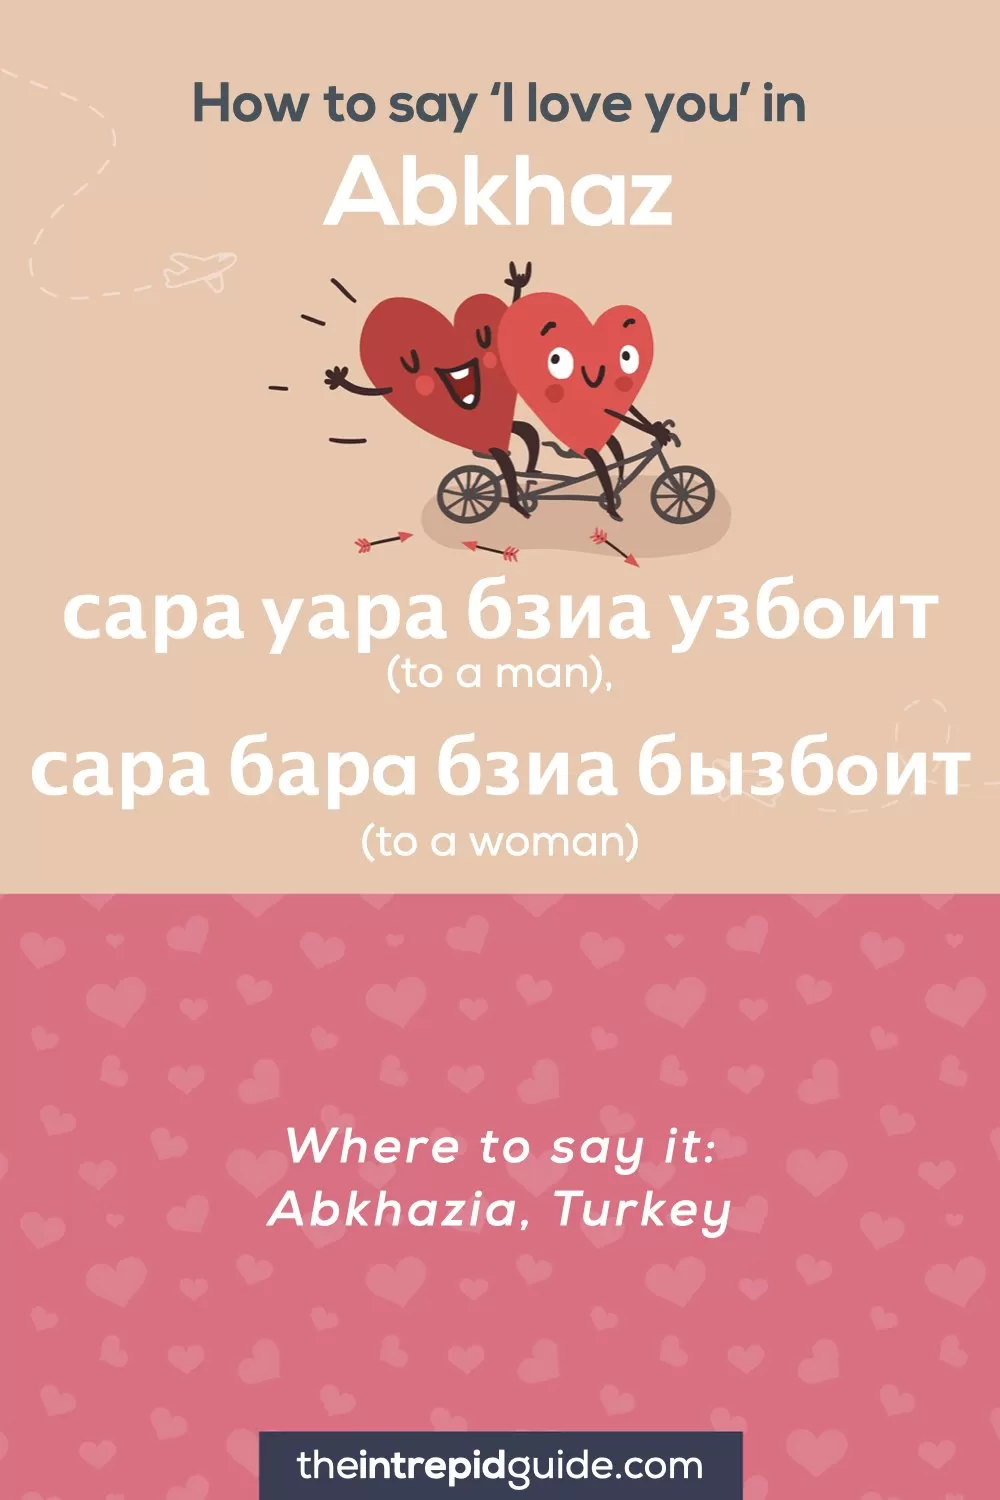 How to say I love you in different languages - Abkhaz - сара yара бзиа узбoит (to a man) - сара барa бзиа бызбoит (to a woman)